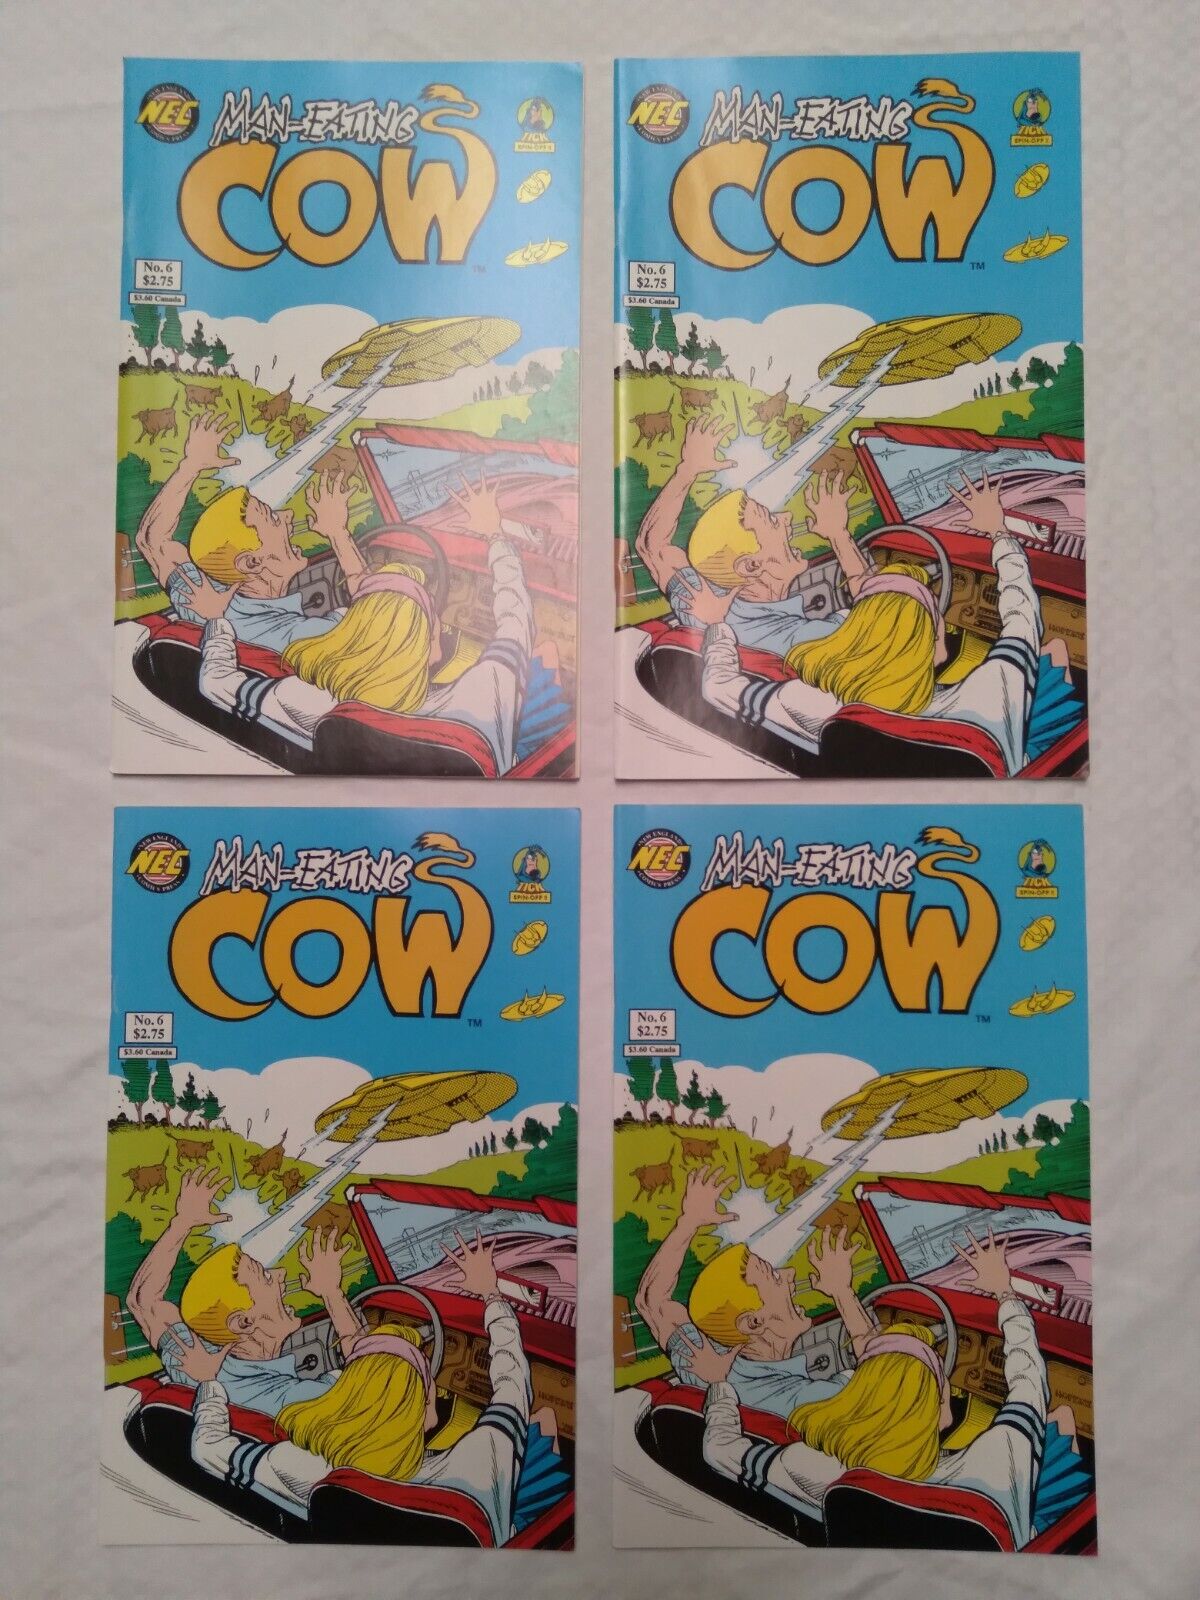 Man-Eating Cow # 6 Four copies  1992 The Tick spin-off #301